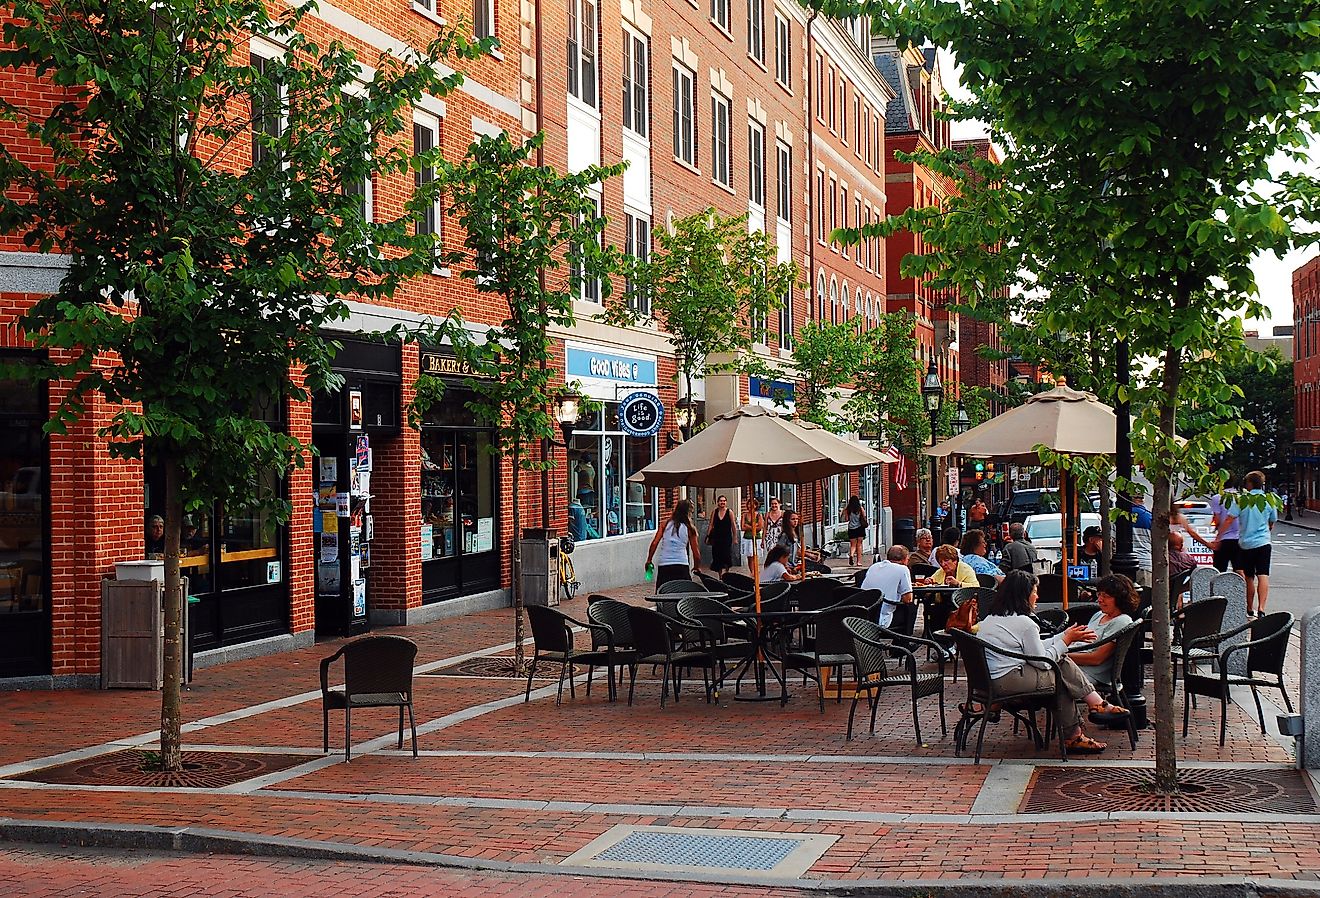 Folks enjoy a warm summer day at an outdoor café in Portsmouth, New Hampshire. Image credit James Kirkikis via Shutterstock